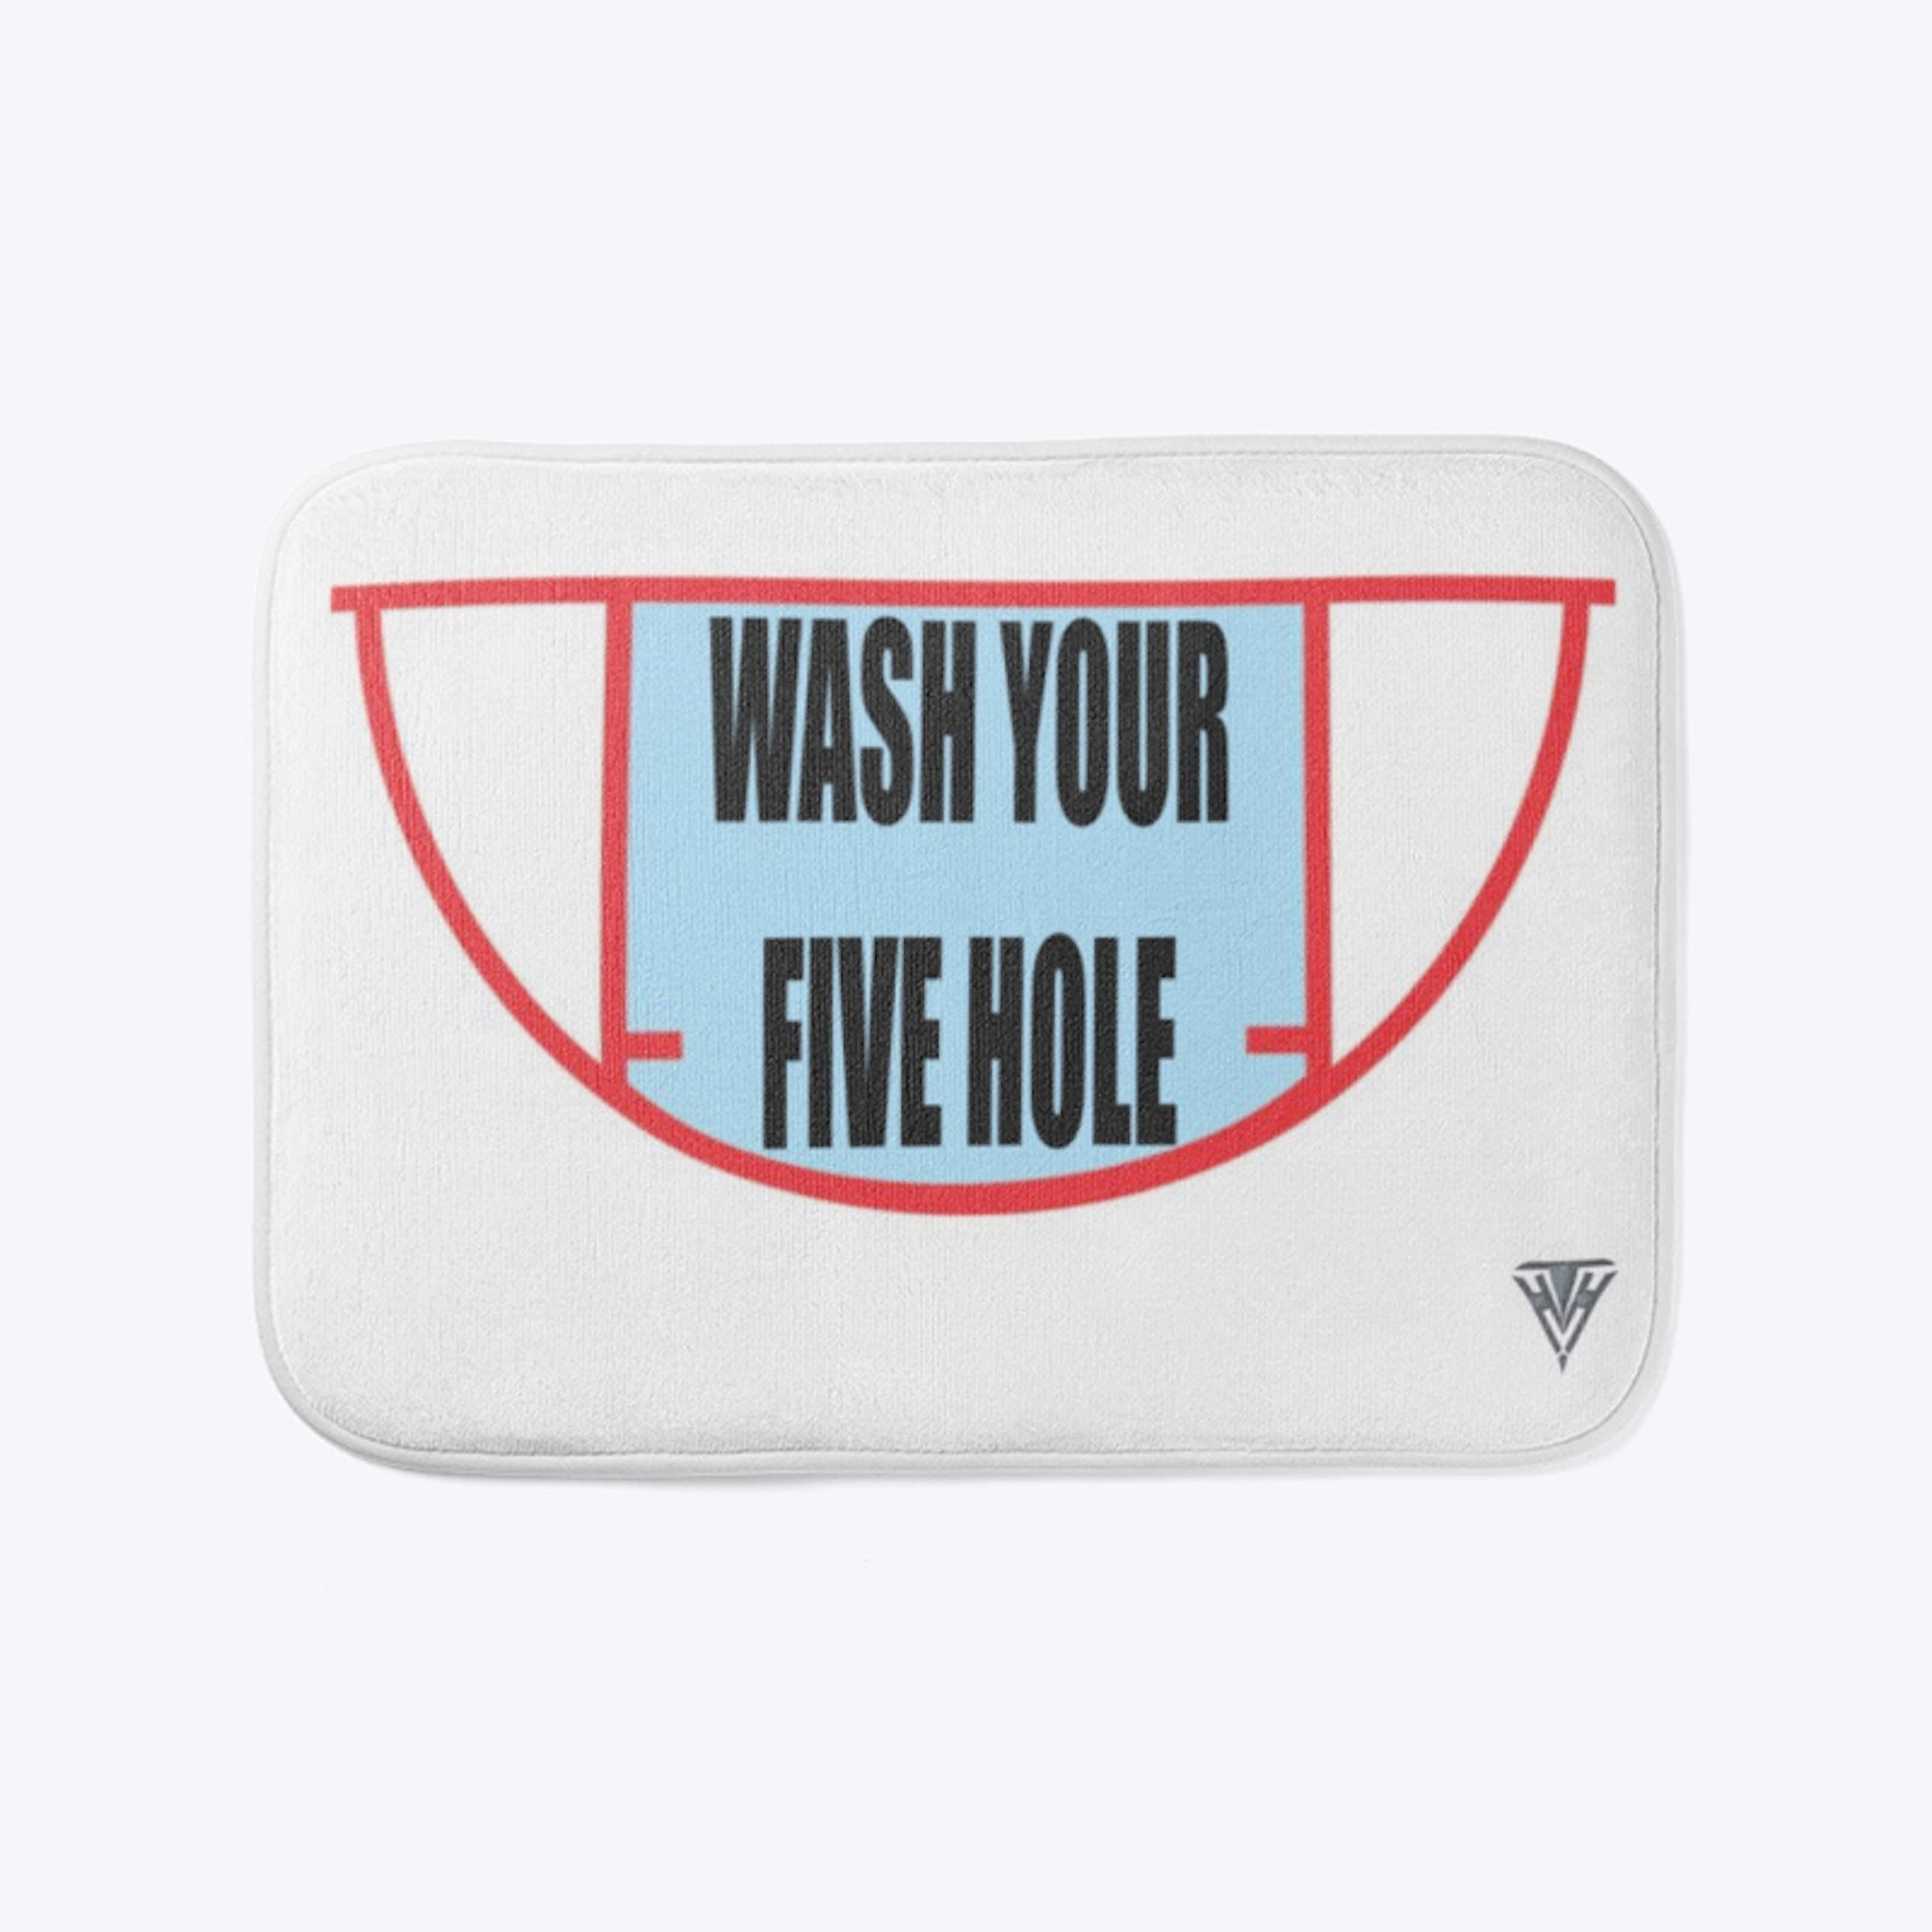 WASH YOUR FIVE HOLE!